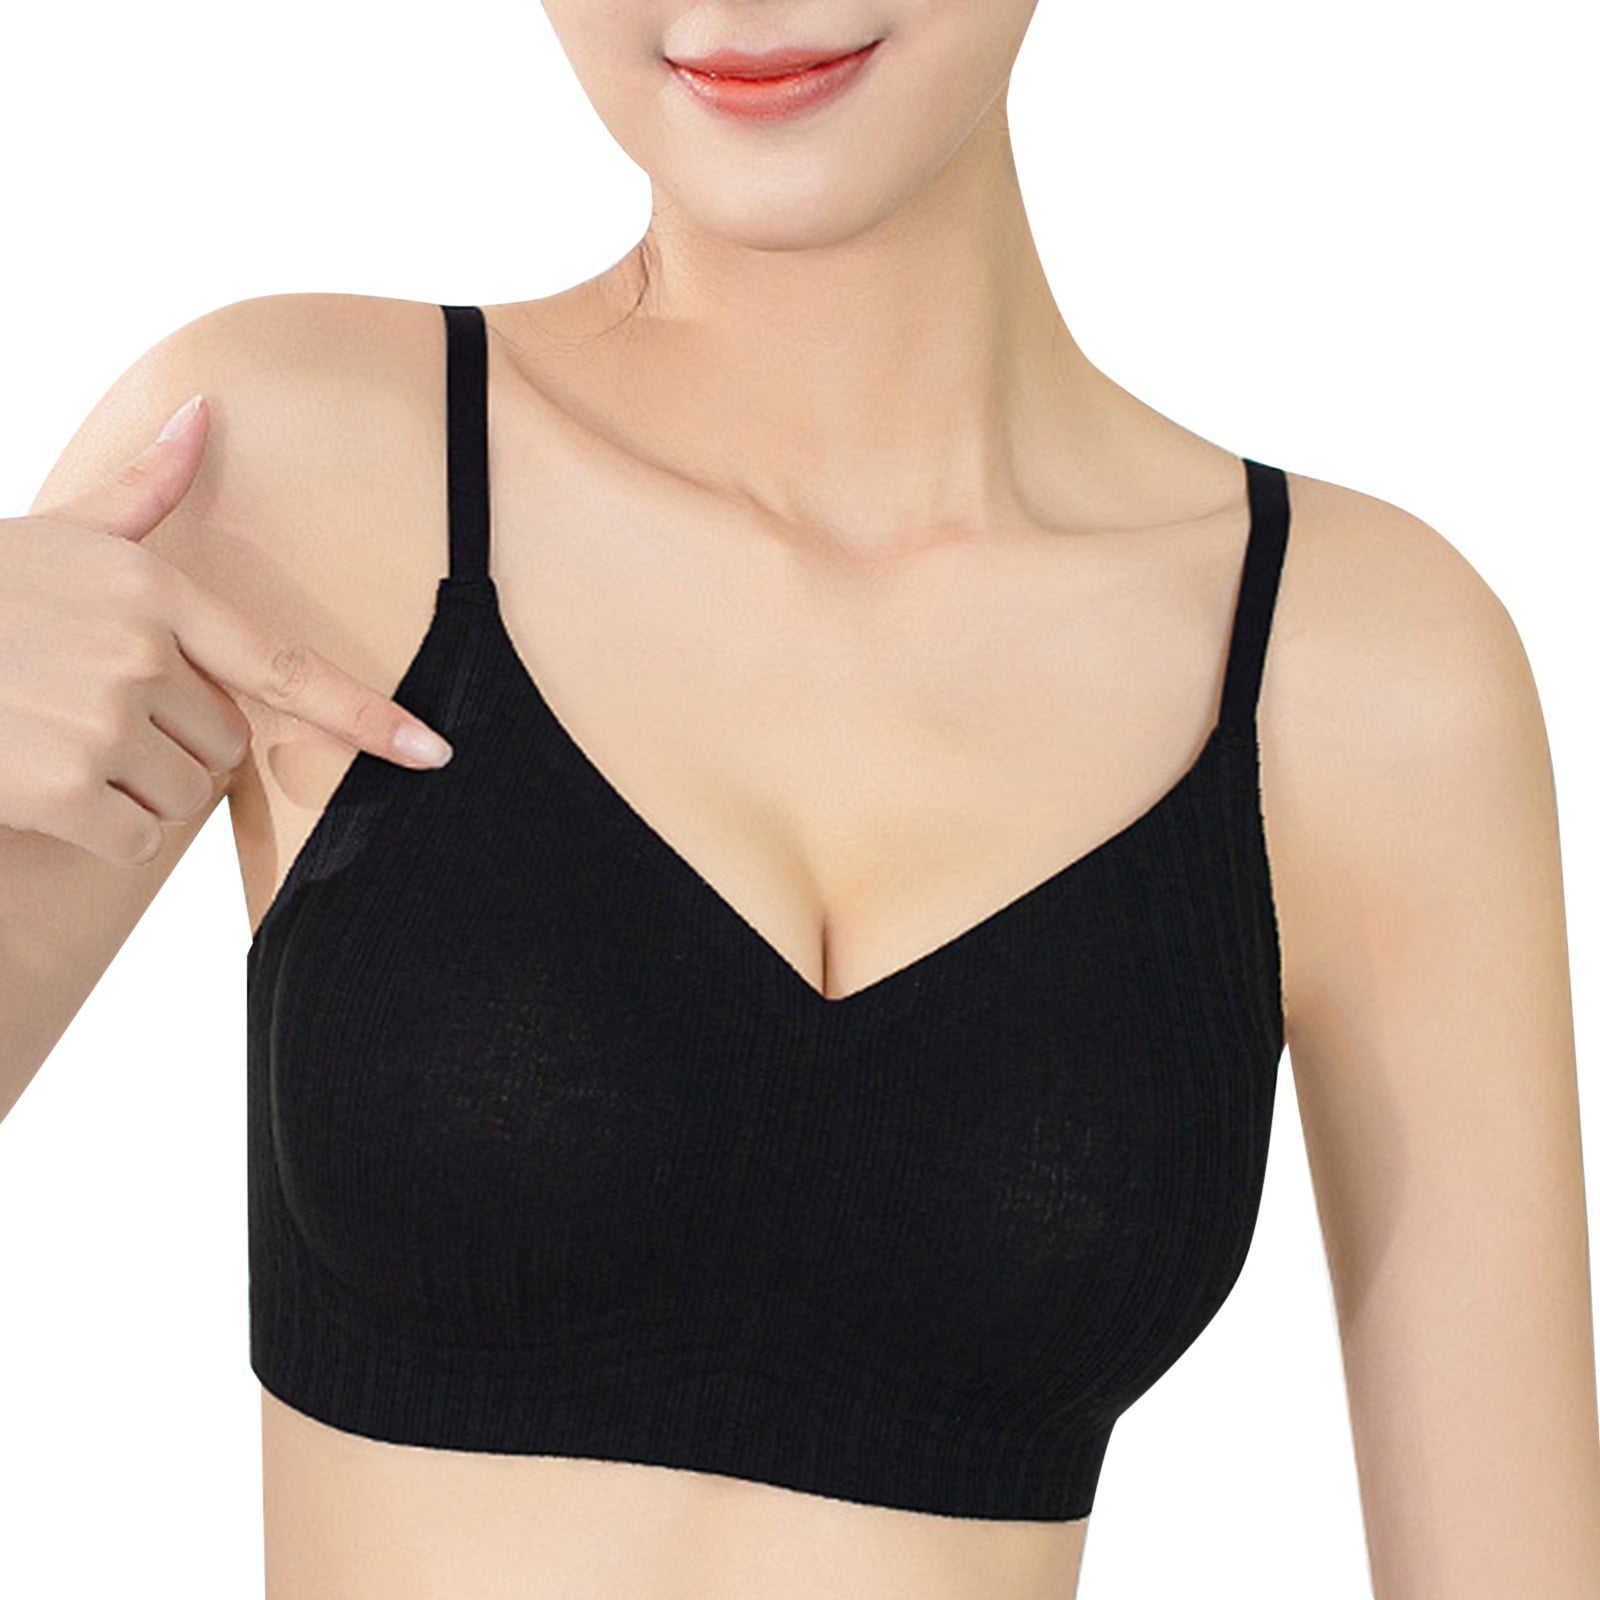 PMUYBHF Push up Wireless Bra for Women Silicone Soft Support Seamless  Adjustable Comfortable Wire Strapless Bras for Women Wireless Bra Non-Slip  Bras for Women no underwire no Padding 